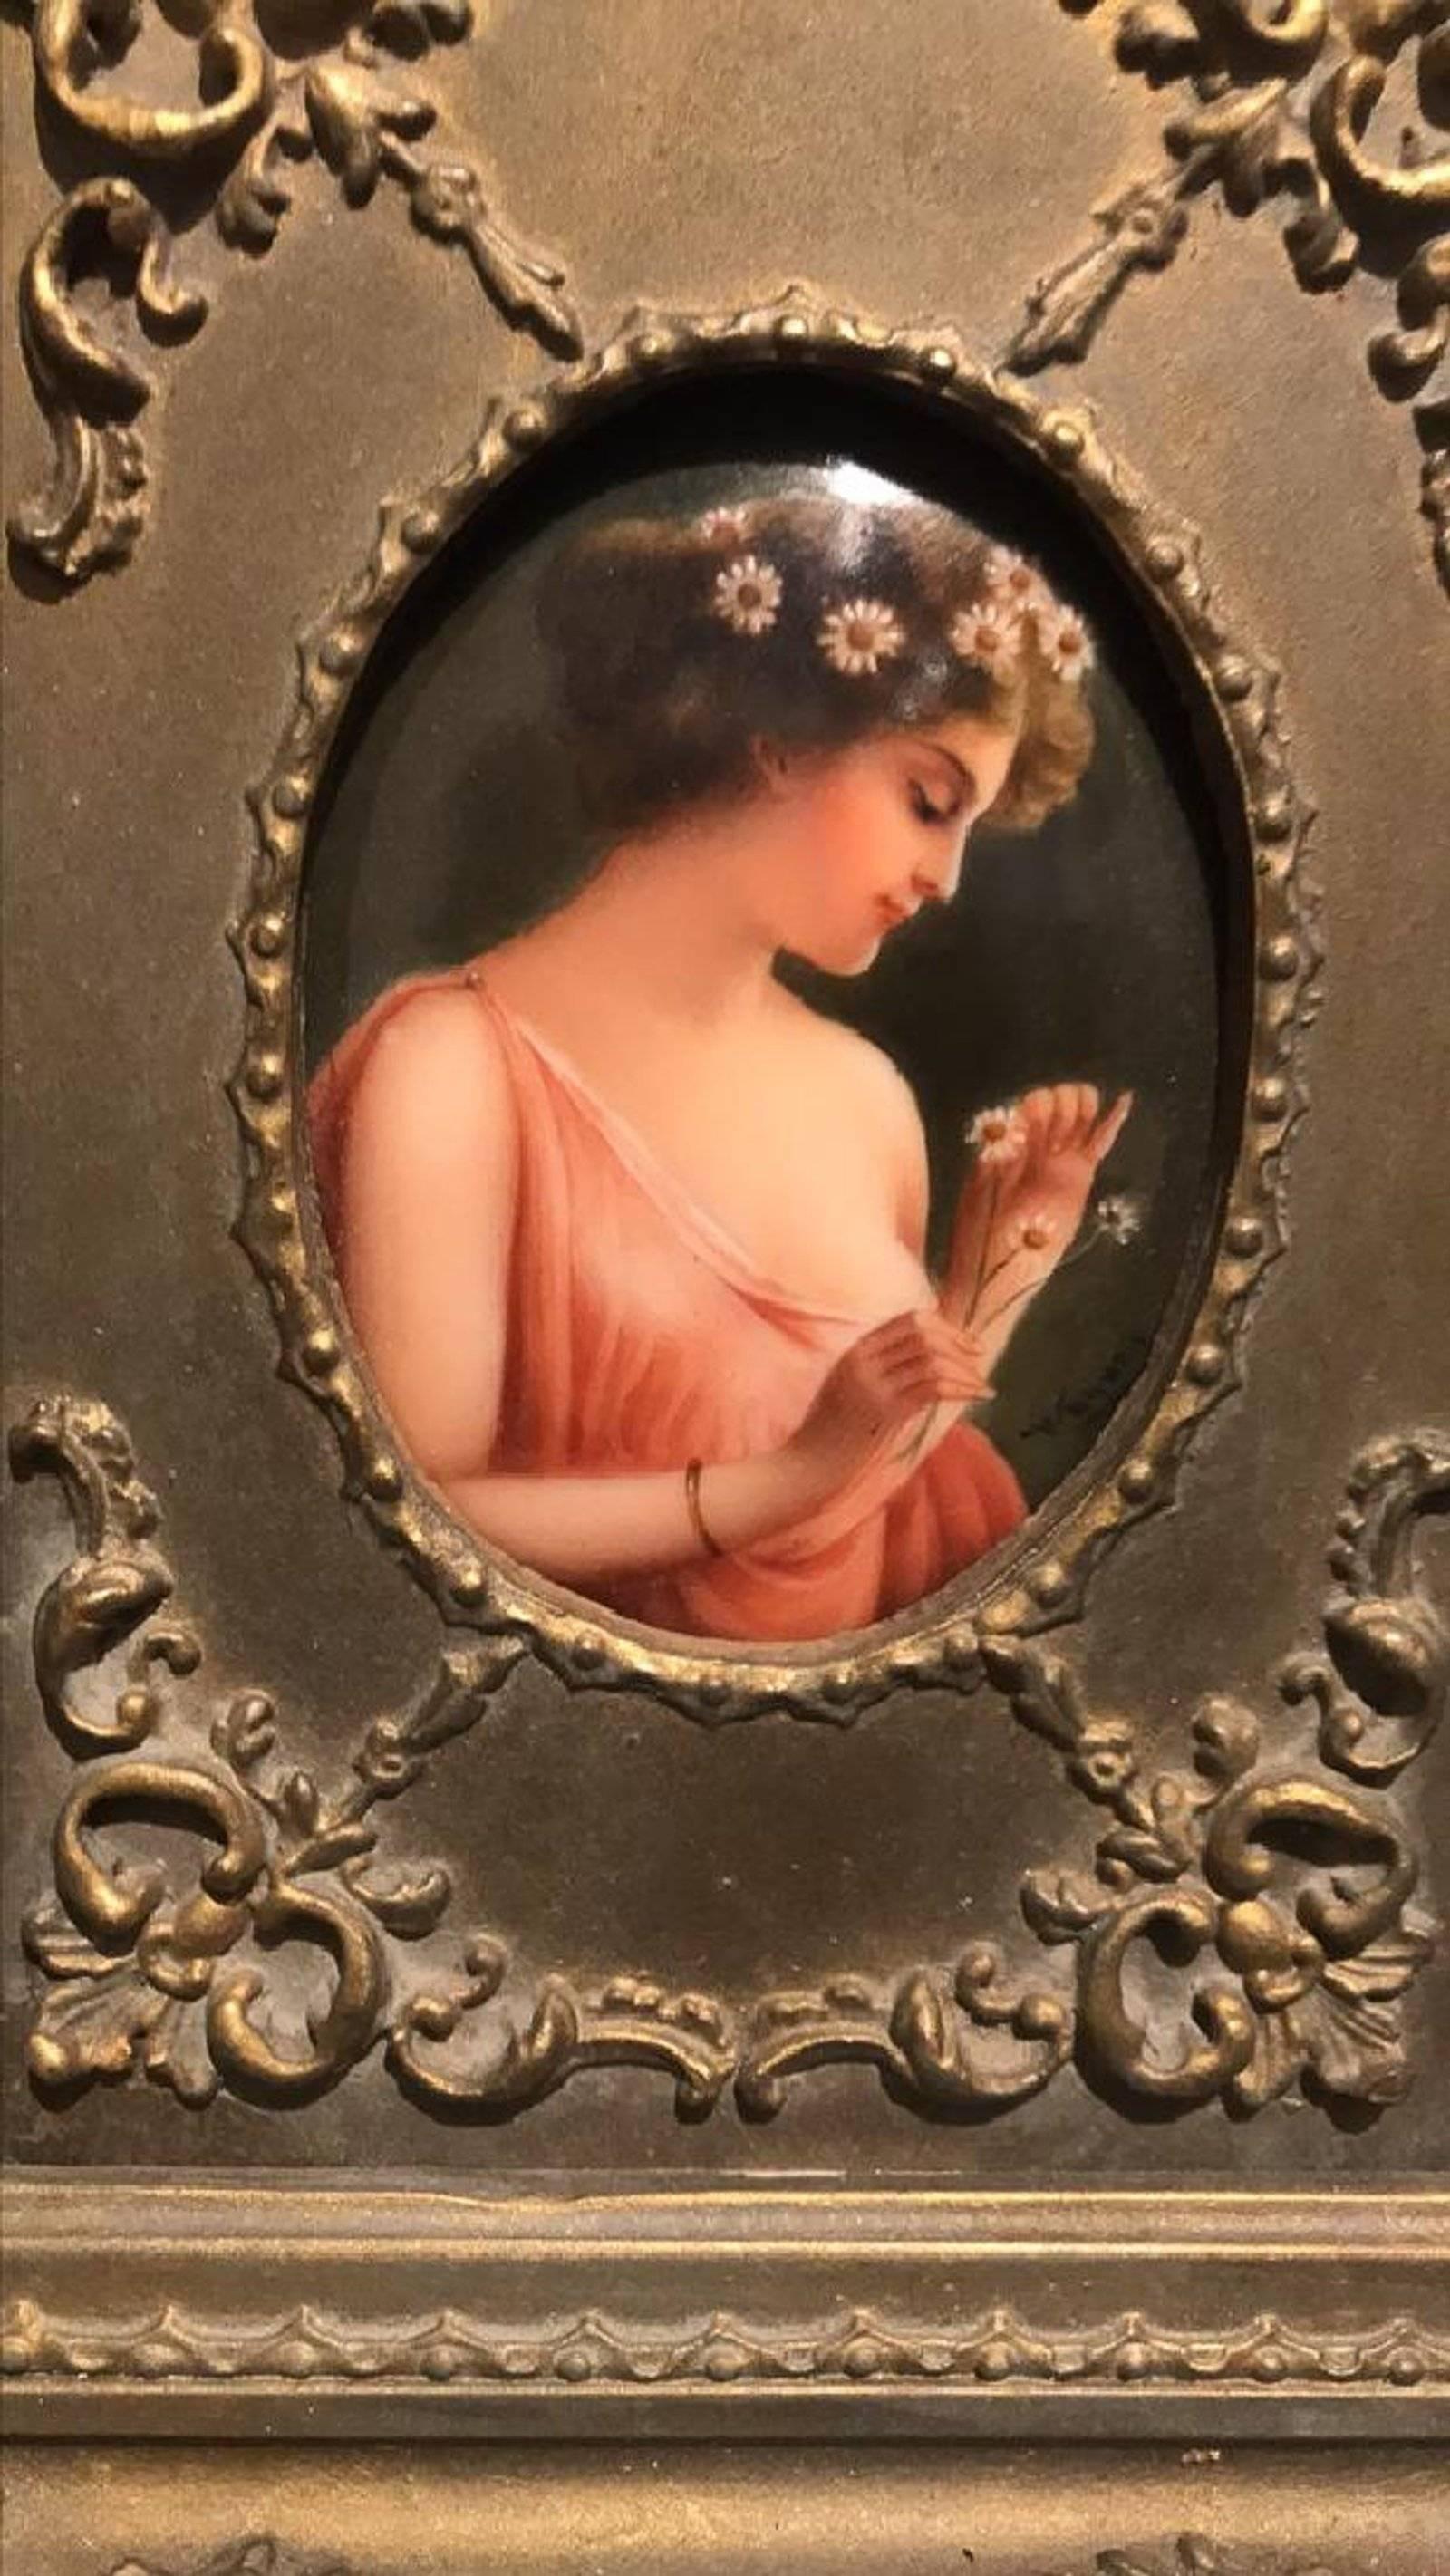 Exquisite antique German hand-painted porcelain portrait plaque of superior detail depicting a young beauty with daisies, signed Wagner and titled on verso 